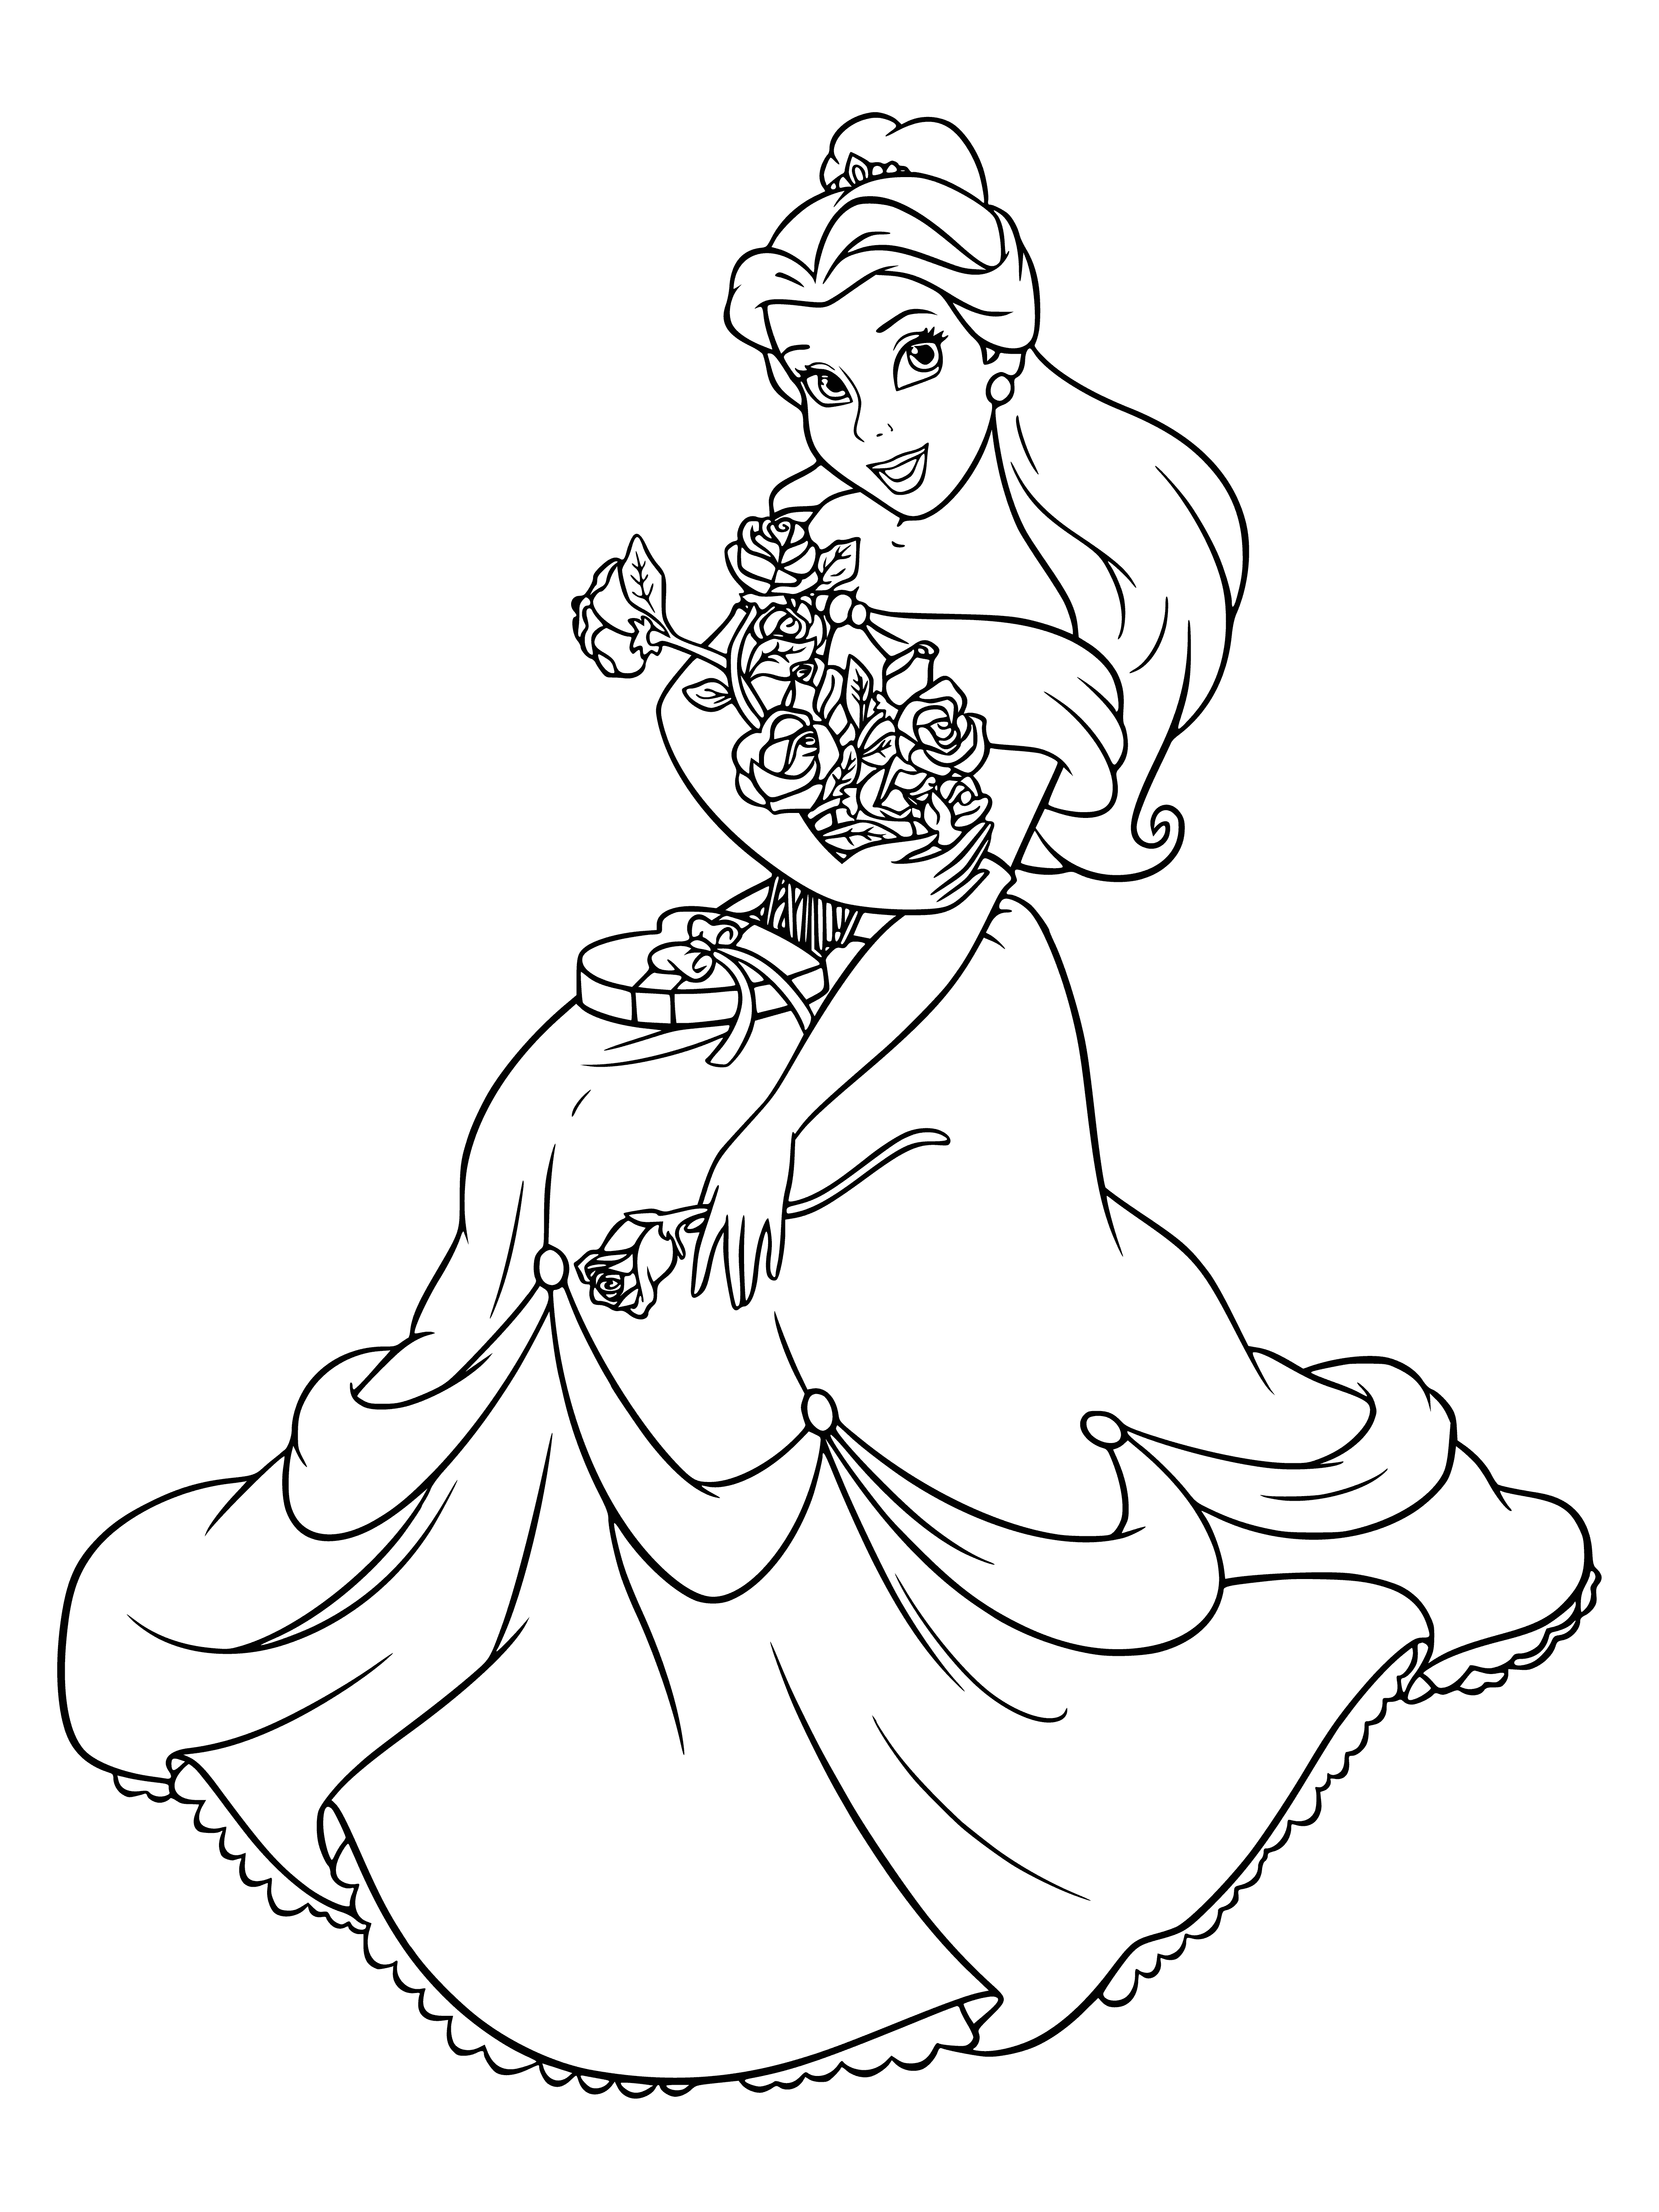 Belle with a bouquet coloring page